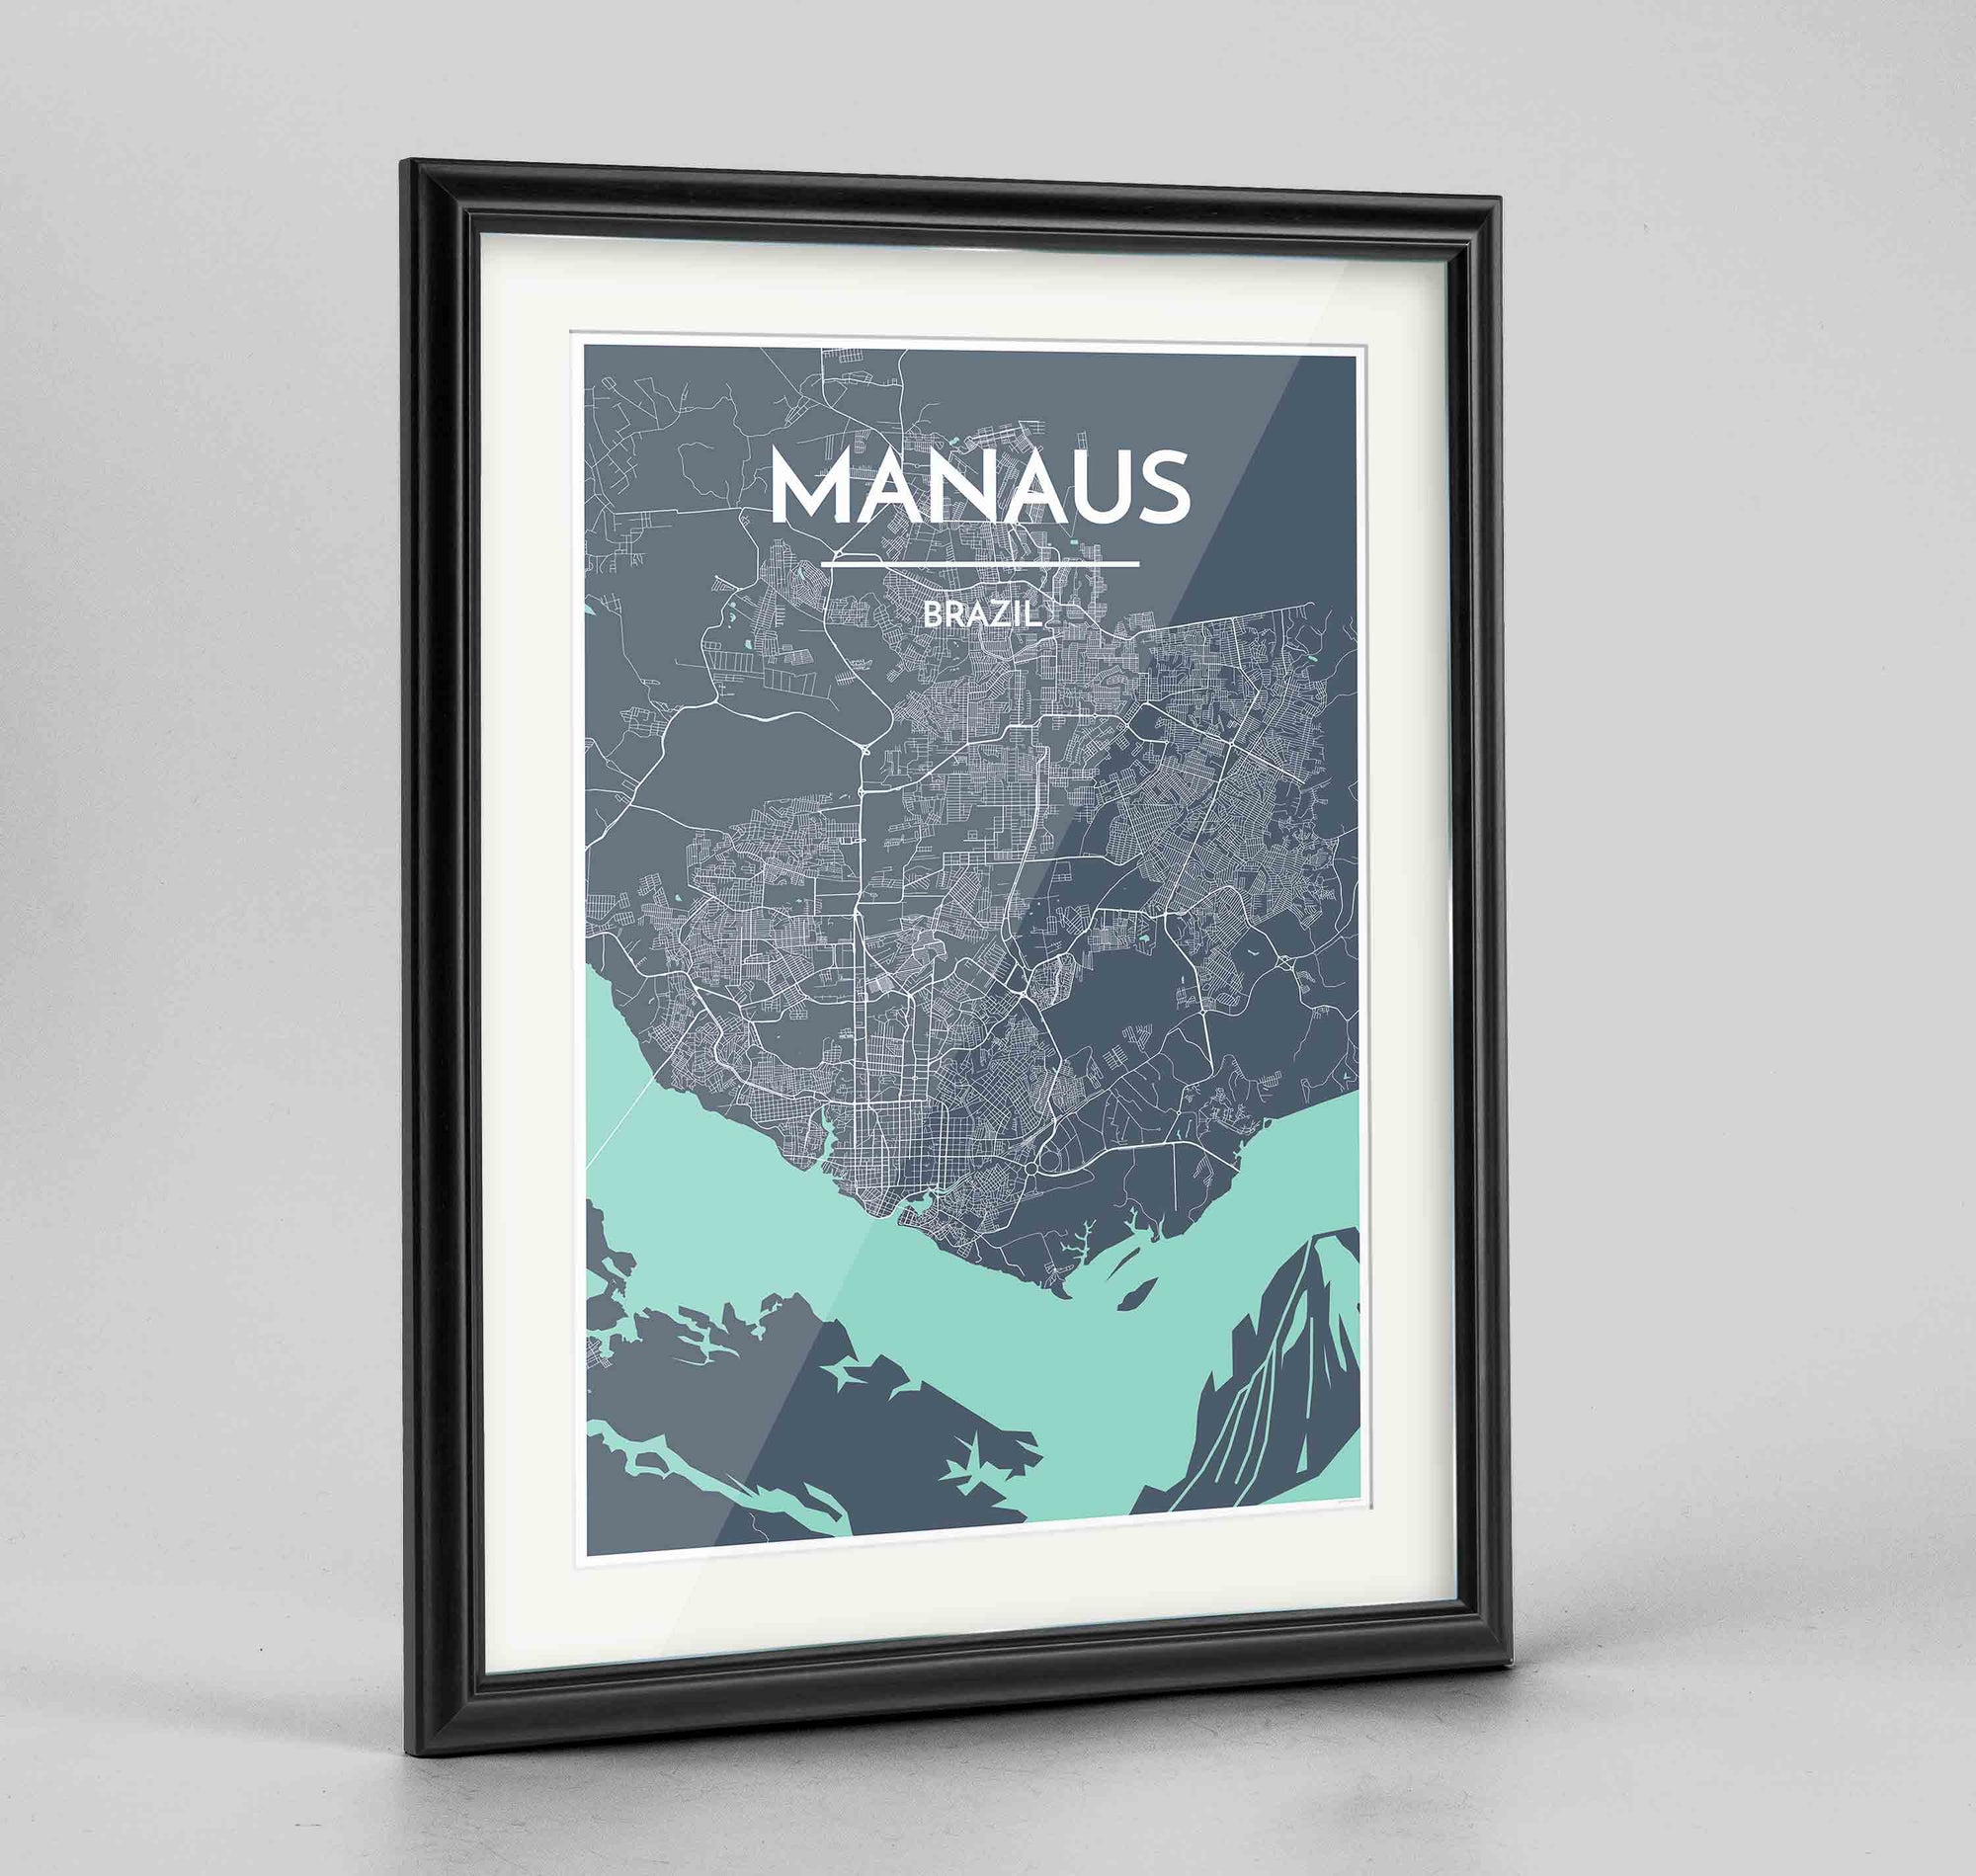 Framed Manaus Map Art Print 24x36" Traditional Black frame Point Two Design Group